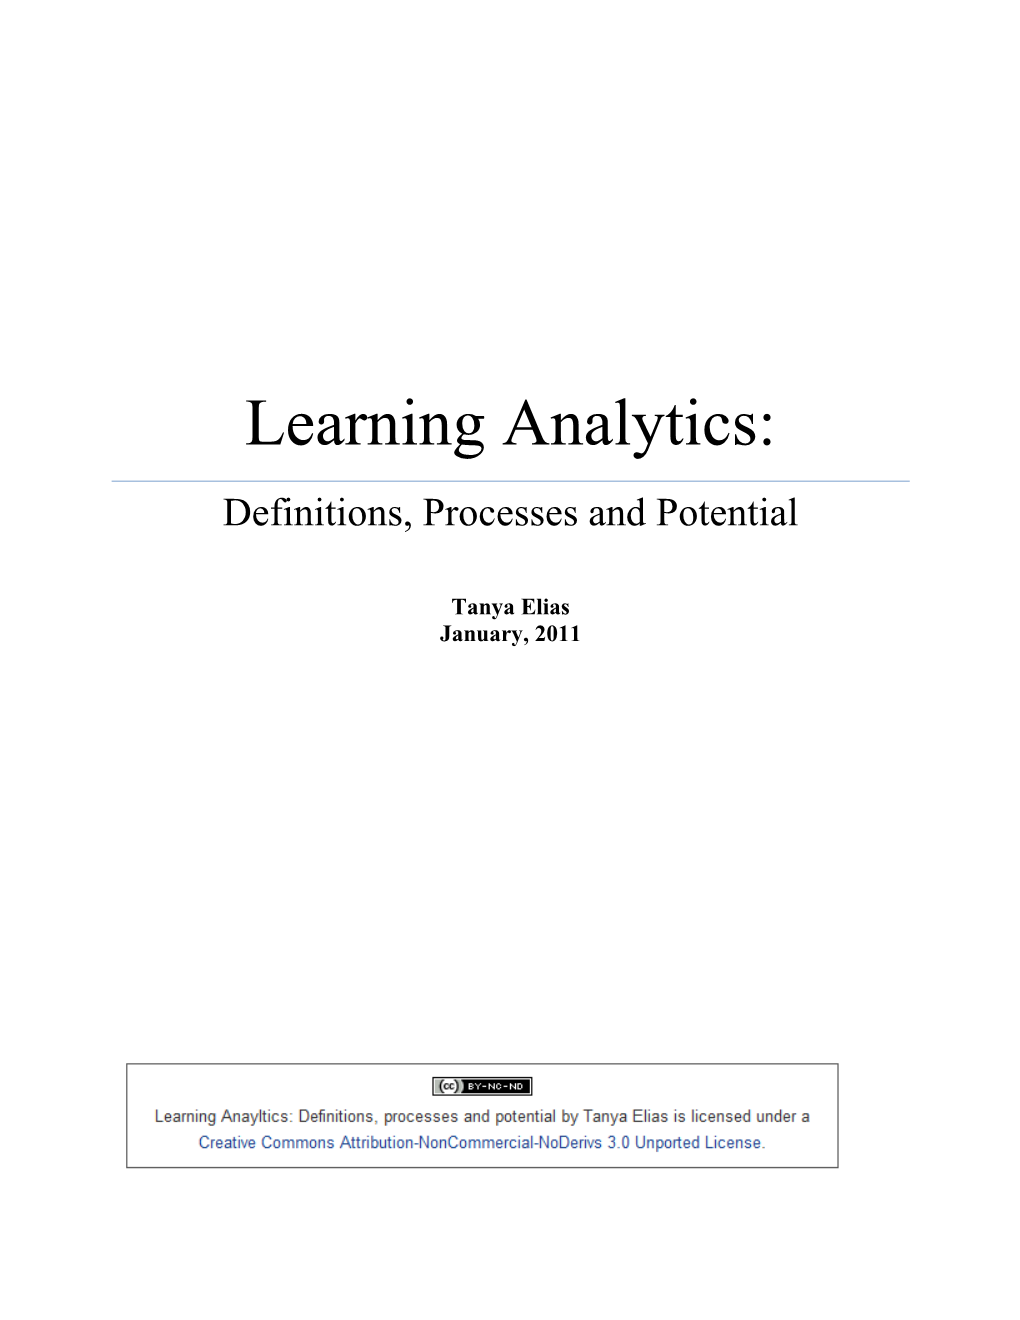 Learning Analytics: Definitions, Processes and Potential